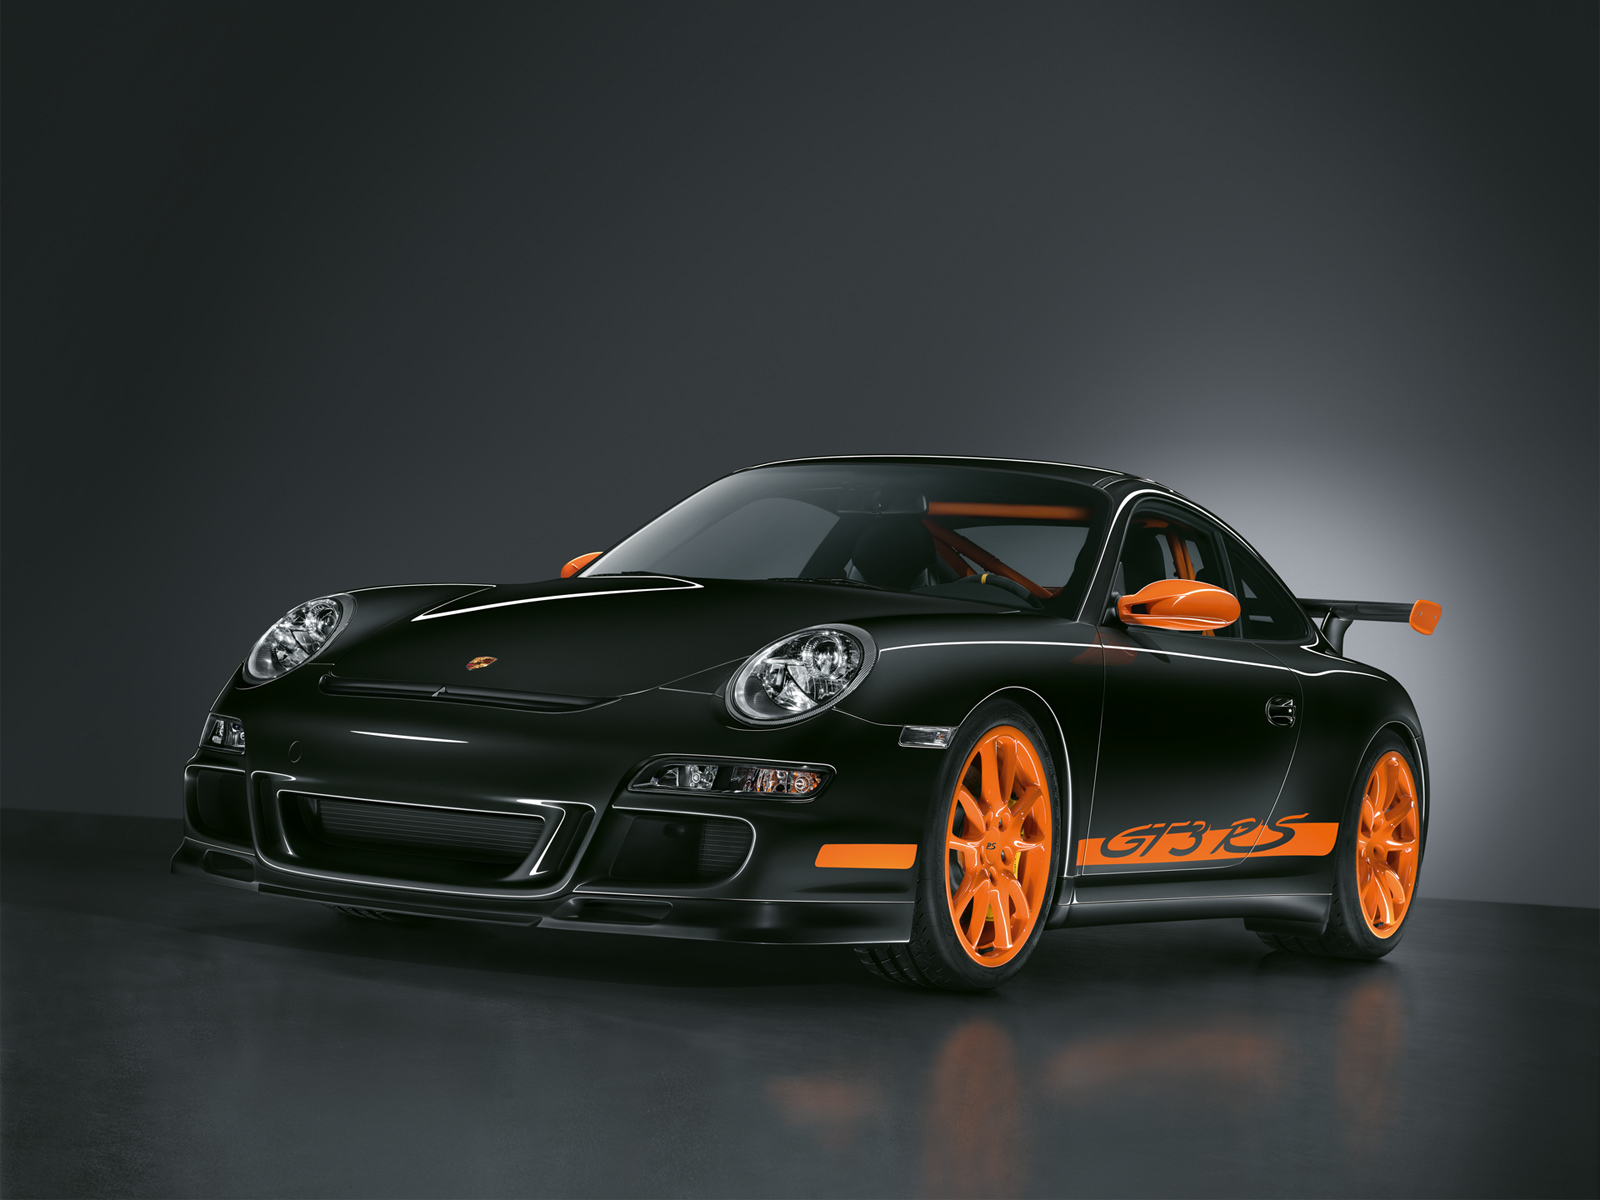 Free Cars HD Wallpapers Porsche GT3 RS Tuning HD Wallpapers